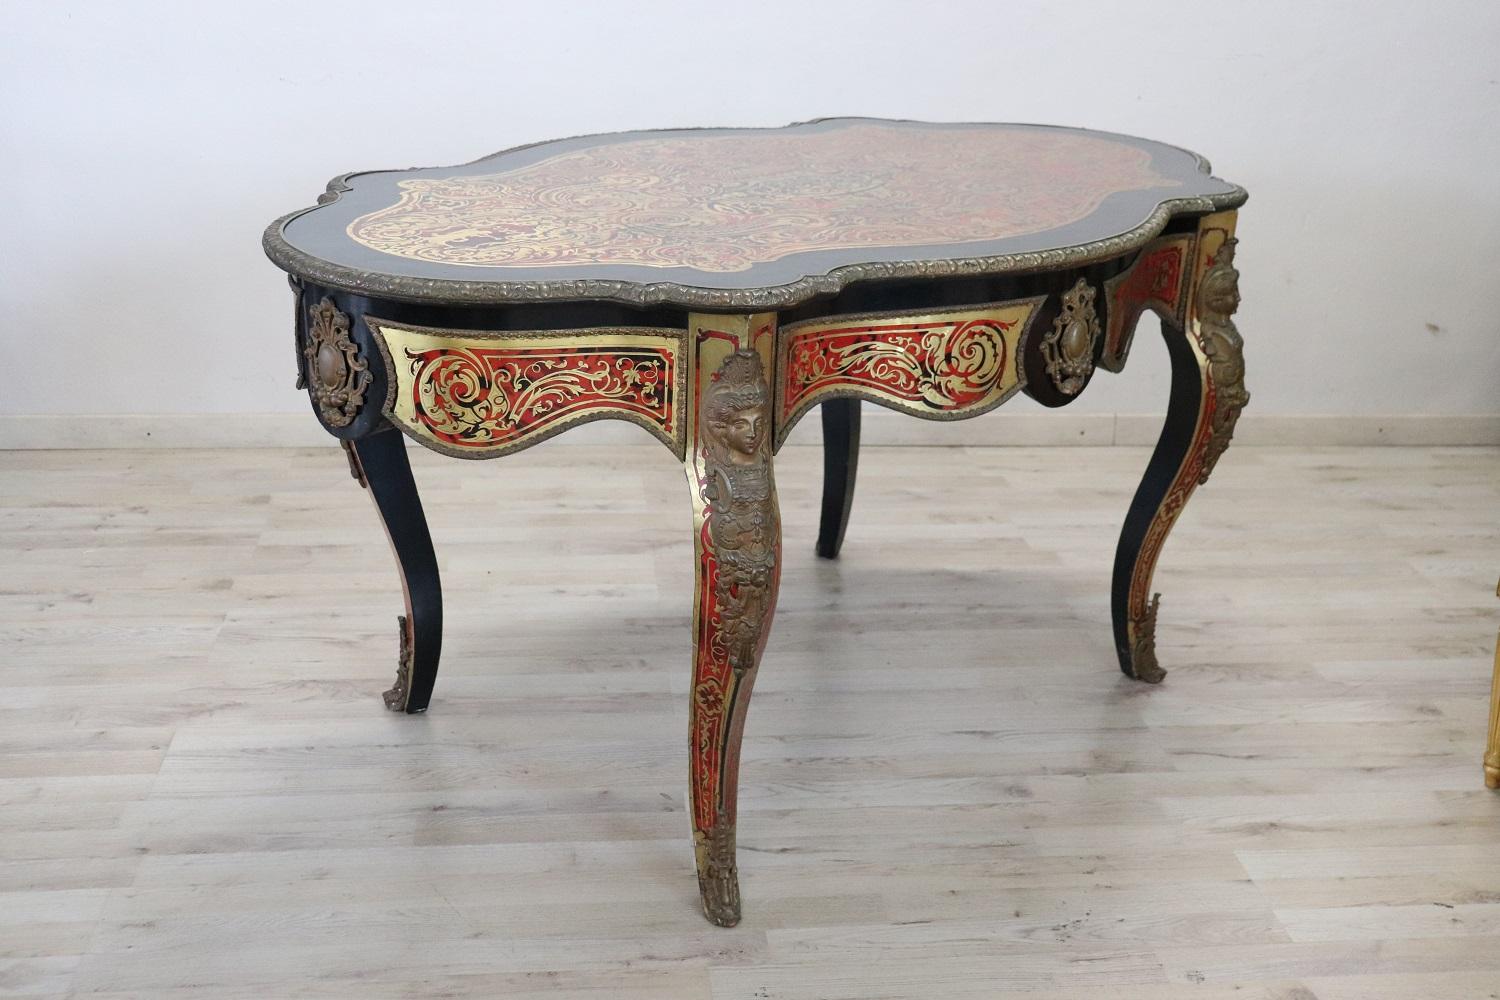 Rare and fine quality Napoleon III French kidney shaped centre table and desk with overall Boulle work. Great quality of cabinet-making, the rich inlay work with gilded bronze covers every part of the piece of furniture. Many decorative elements in